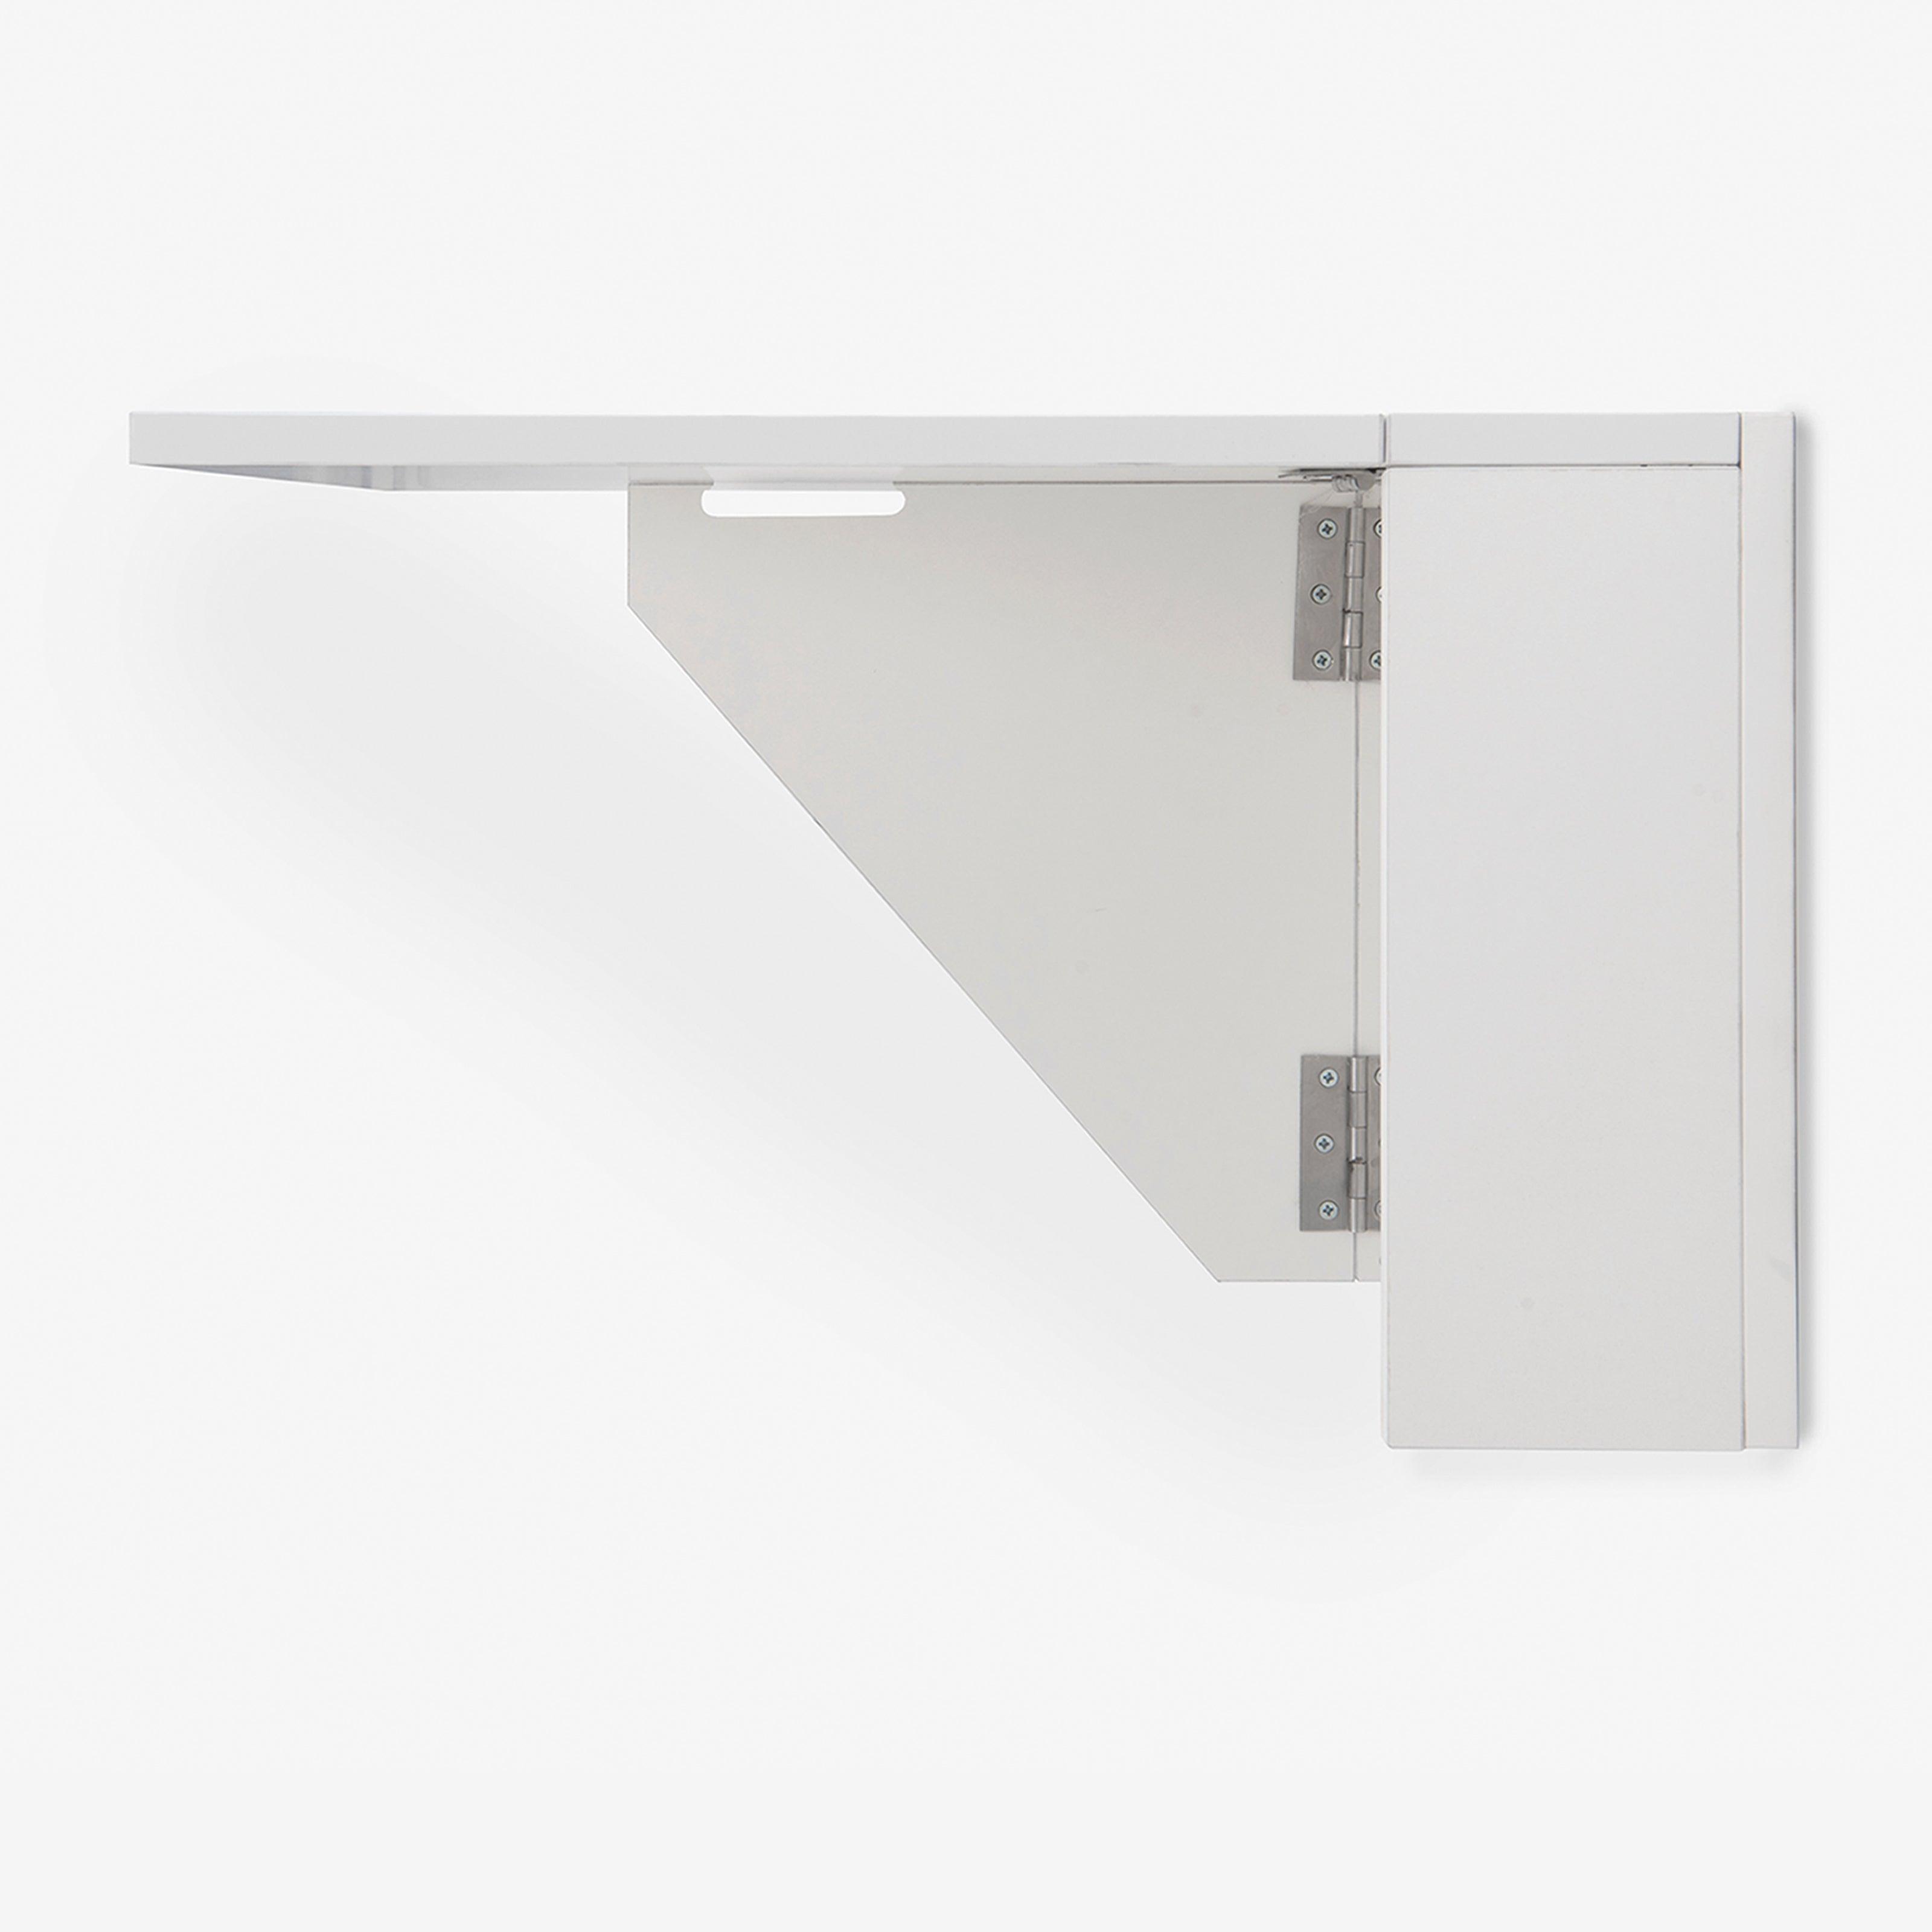 Wall Mounted iDesk with Ledge & Storage